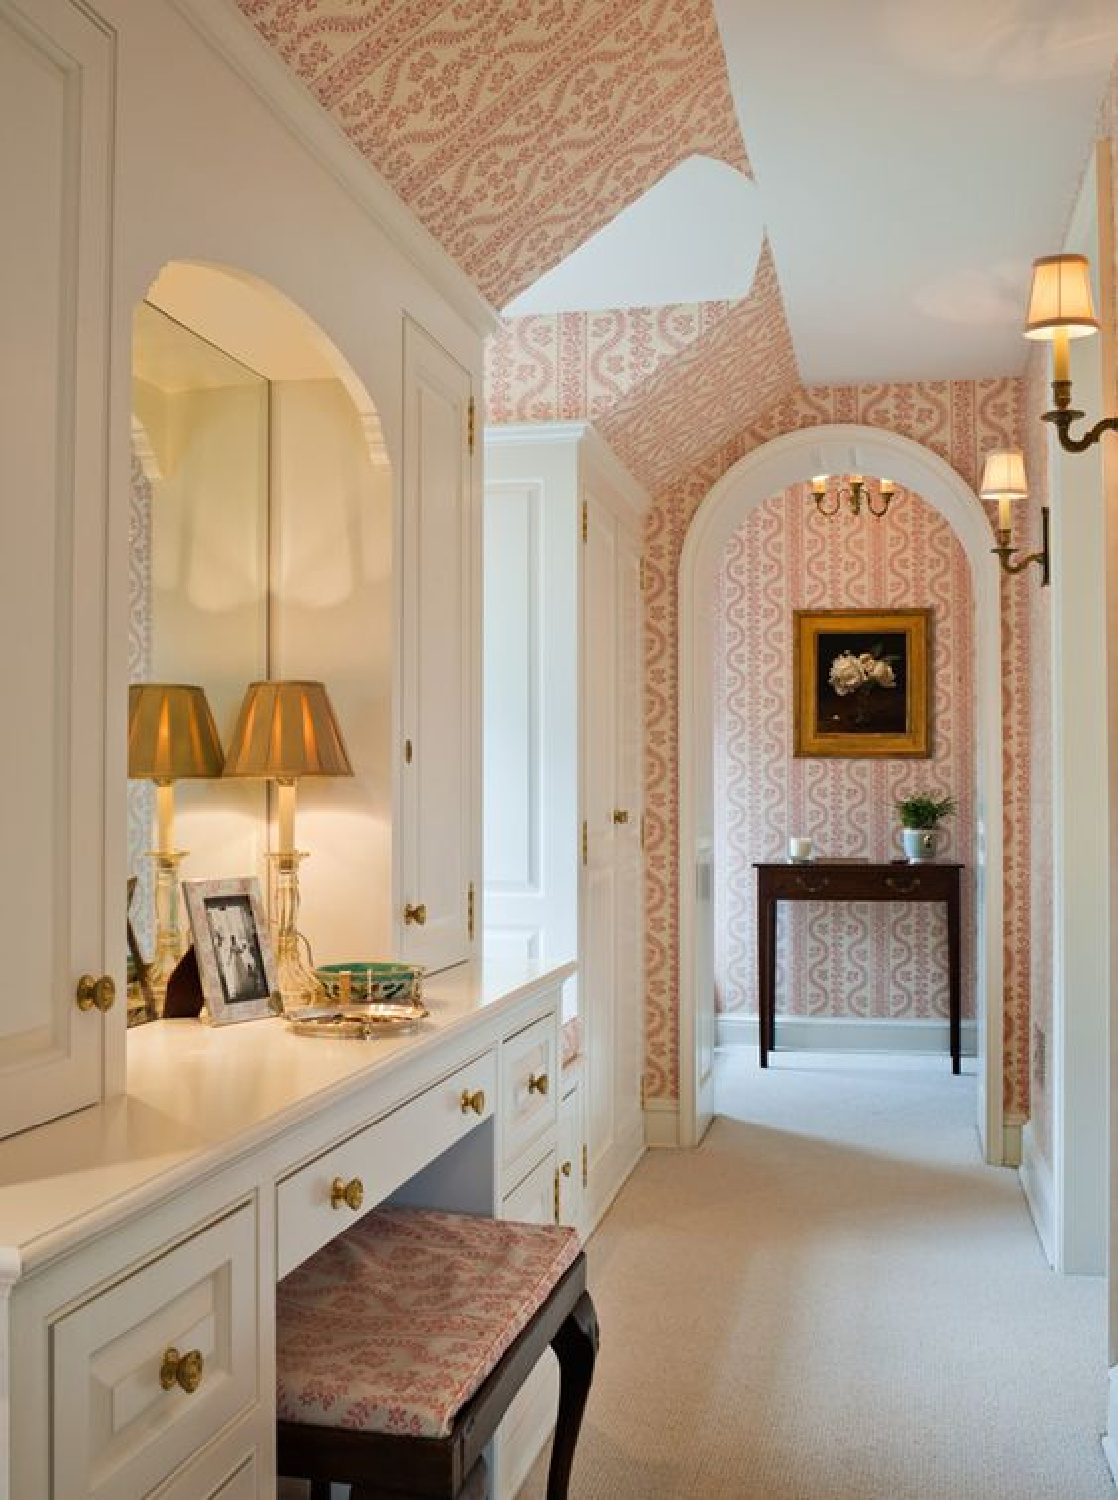 Wondrous and cozy, this romantic timeless bath (Meg Braff) has an enviable makeup vanity, sconces, and rosy pink wallpaper. #cozybathroom #timelessinteriors